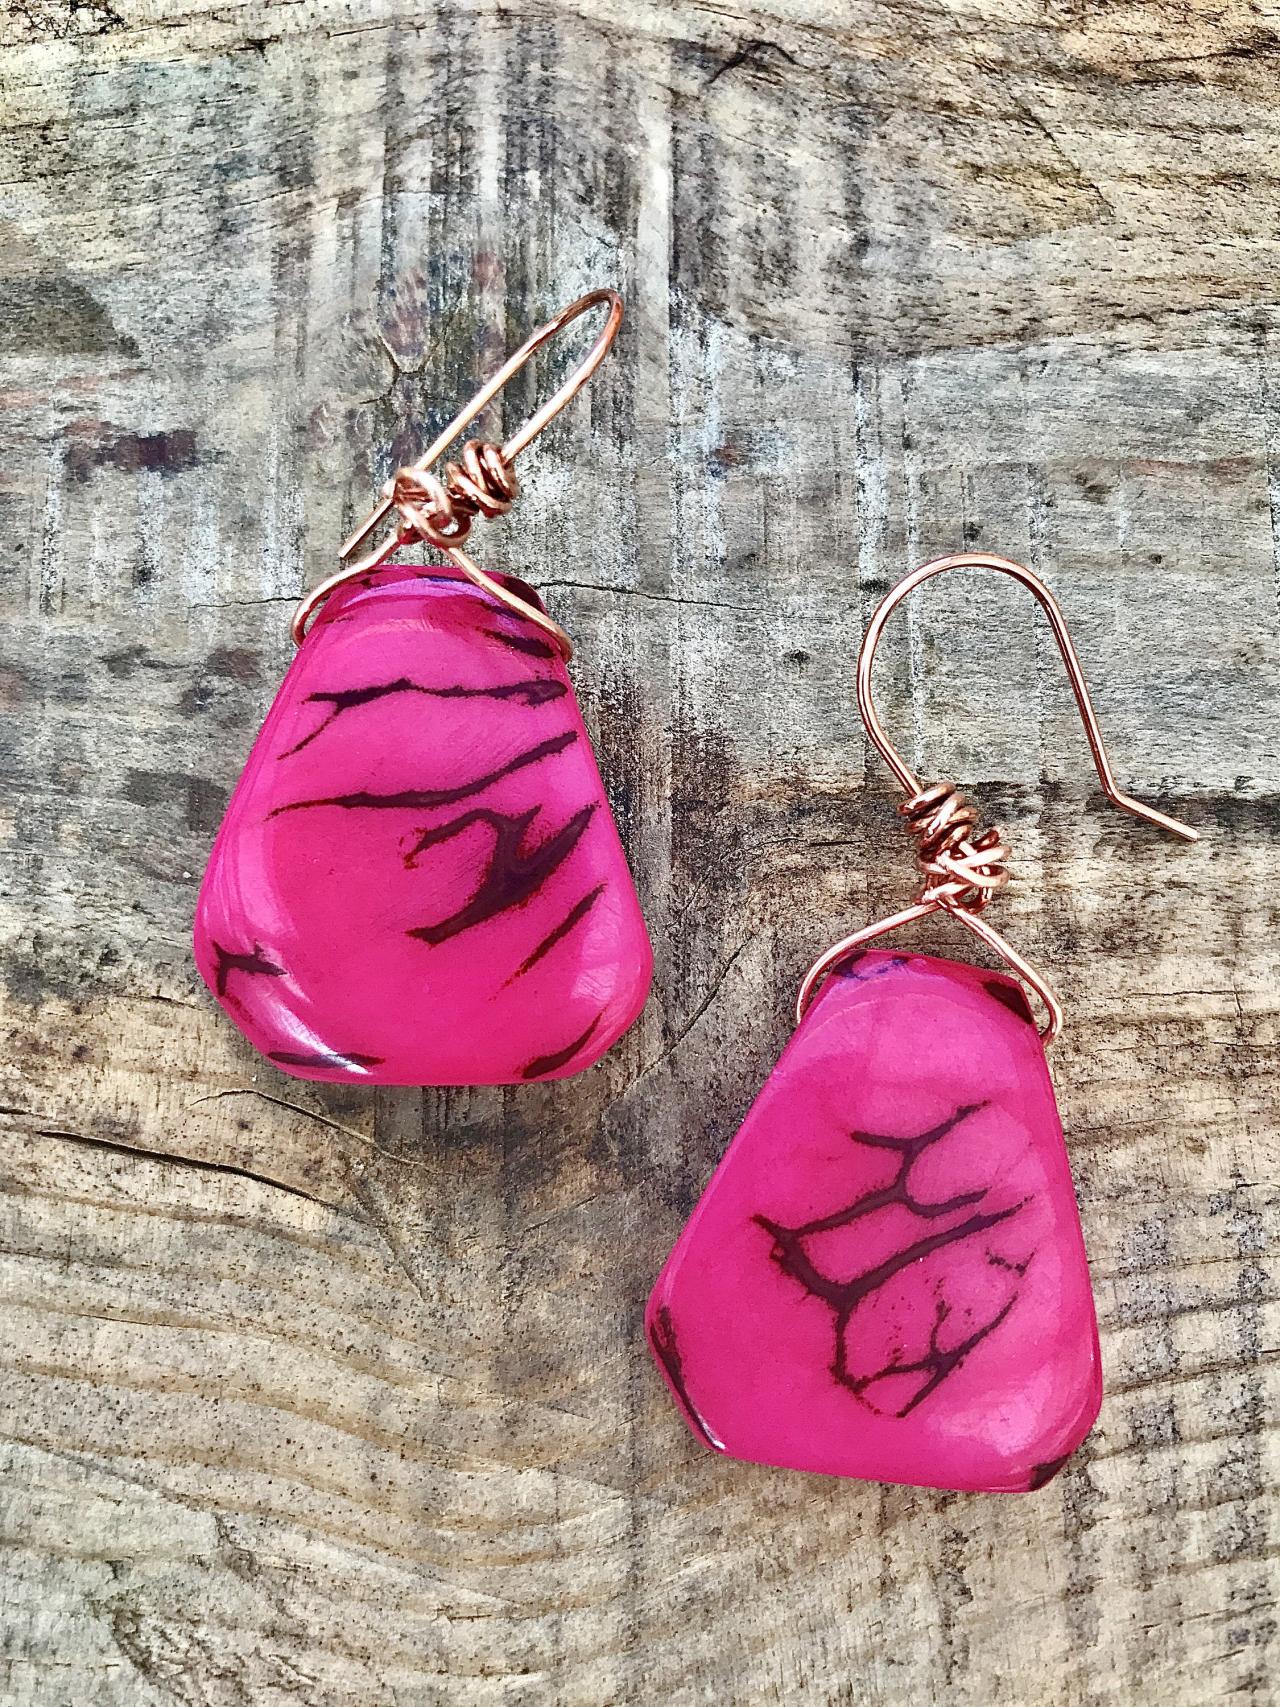 Pink Tagua Nut (vegetable Ivory) Dangle Earrings With Copper Ear Wires.